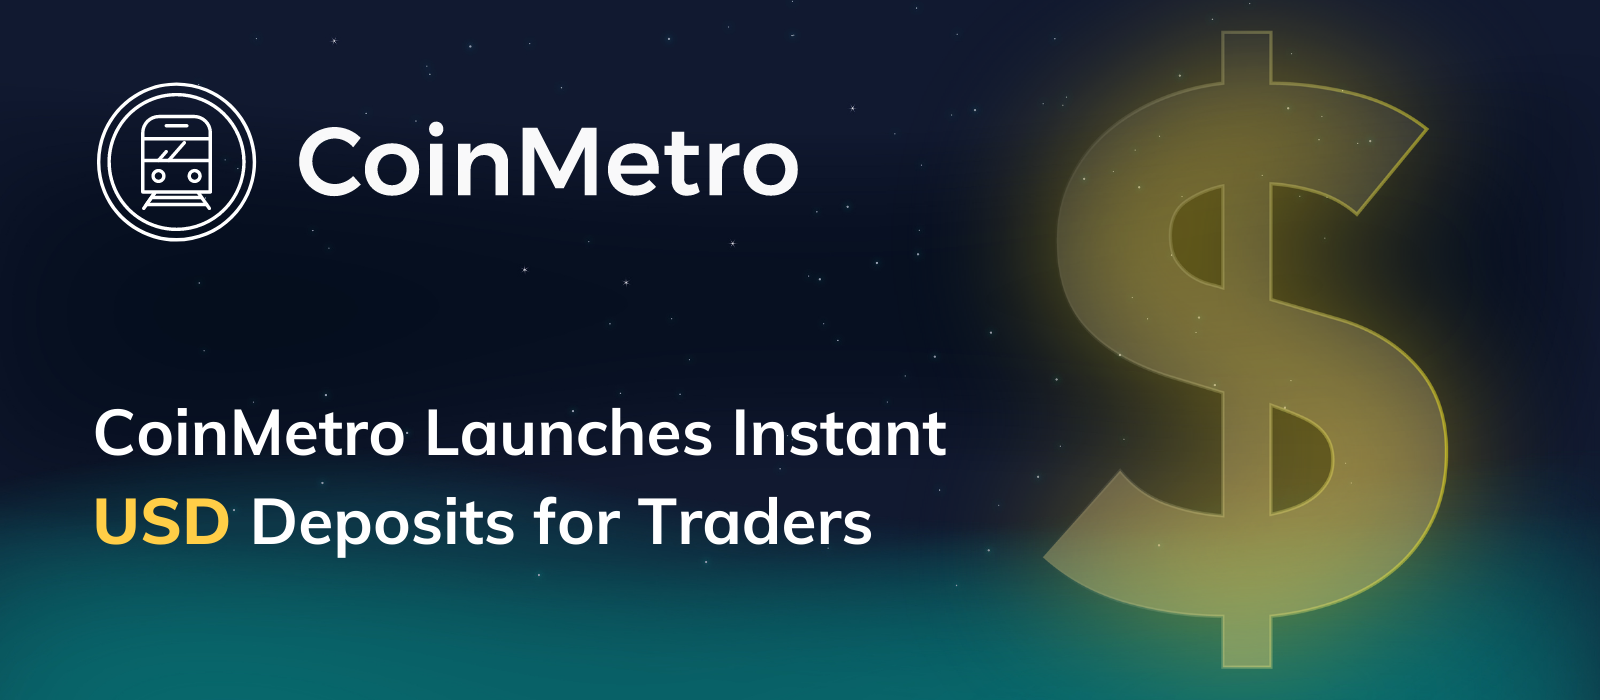 Welcoming USD to BTC Transactions on CoinMetro